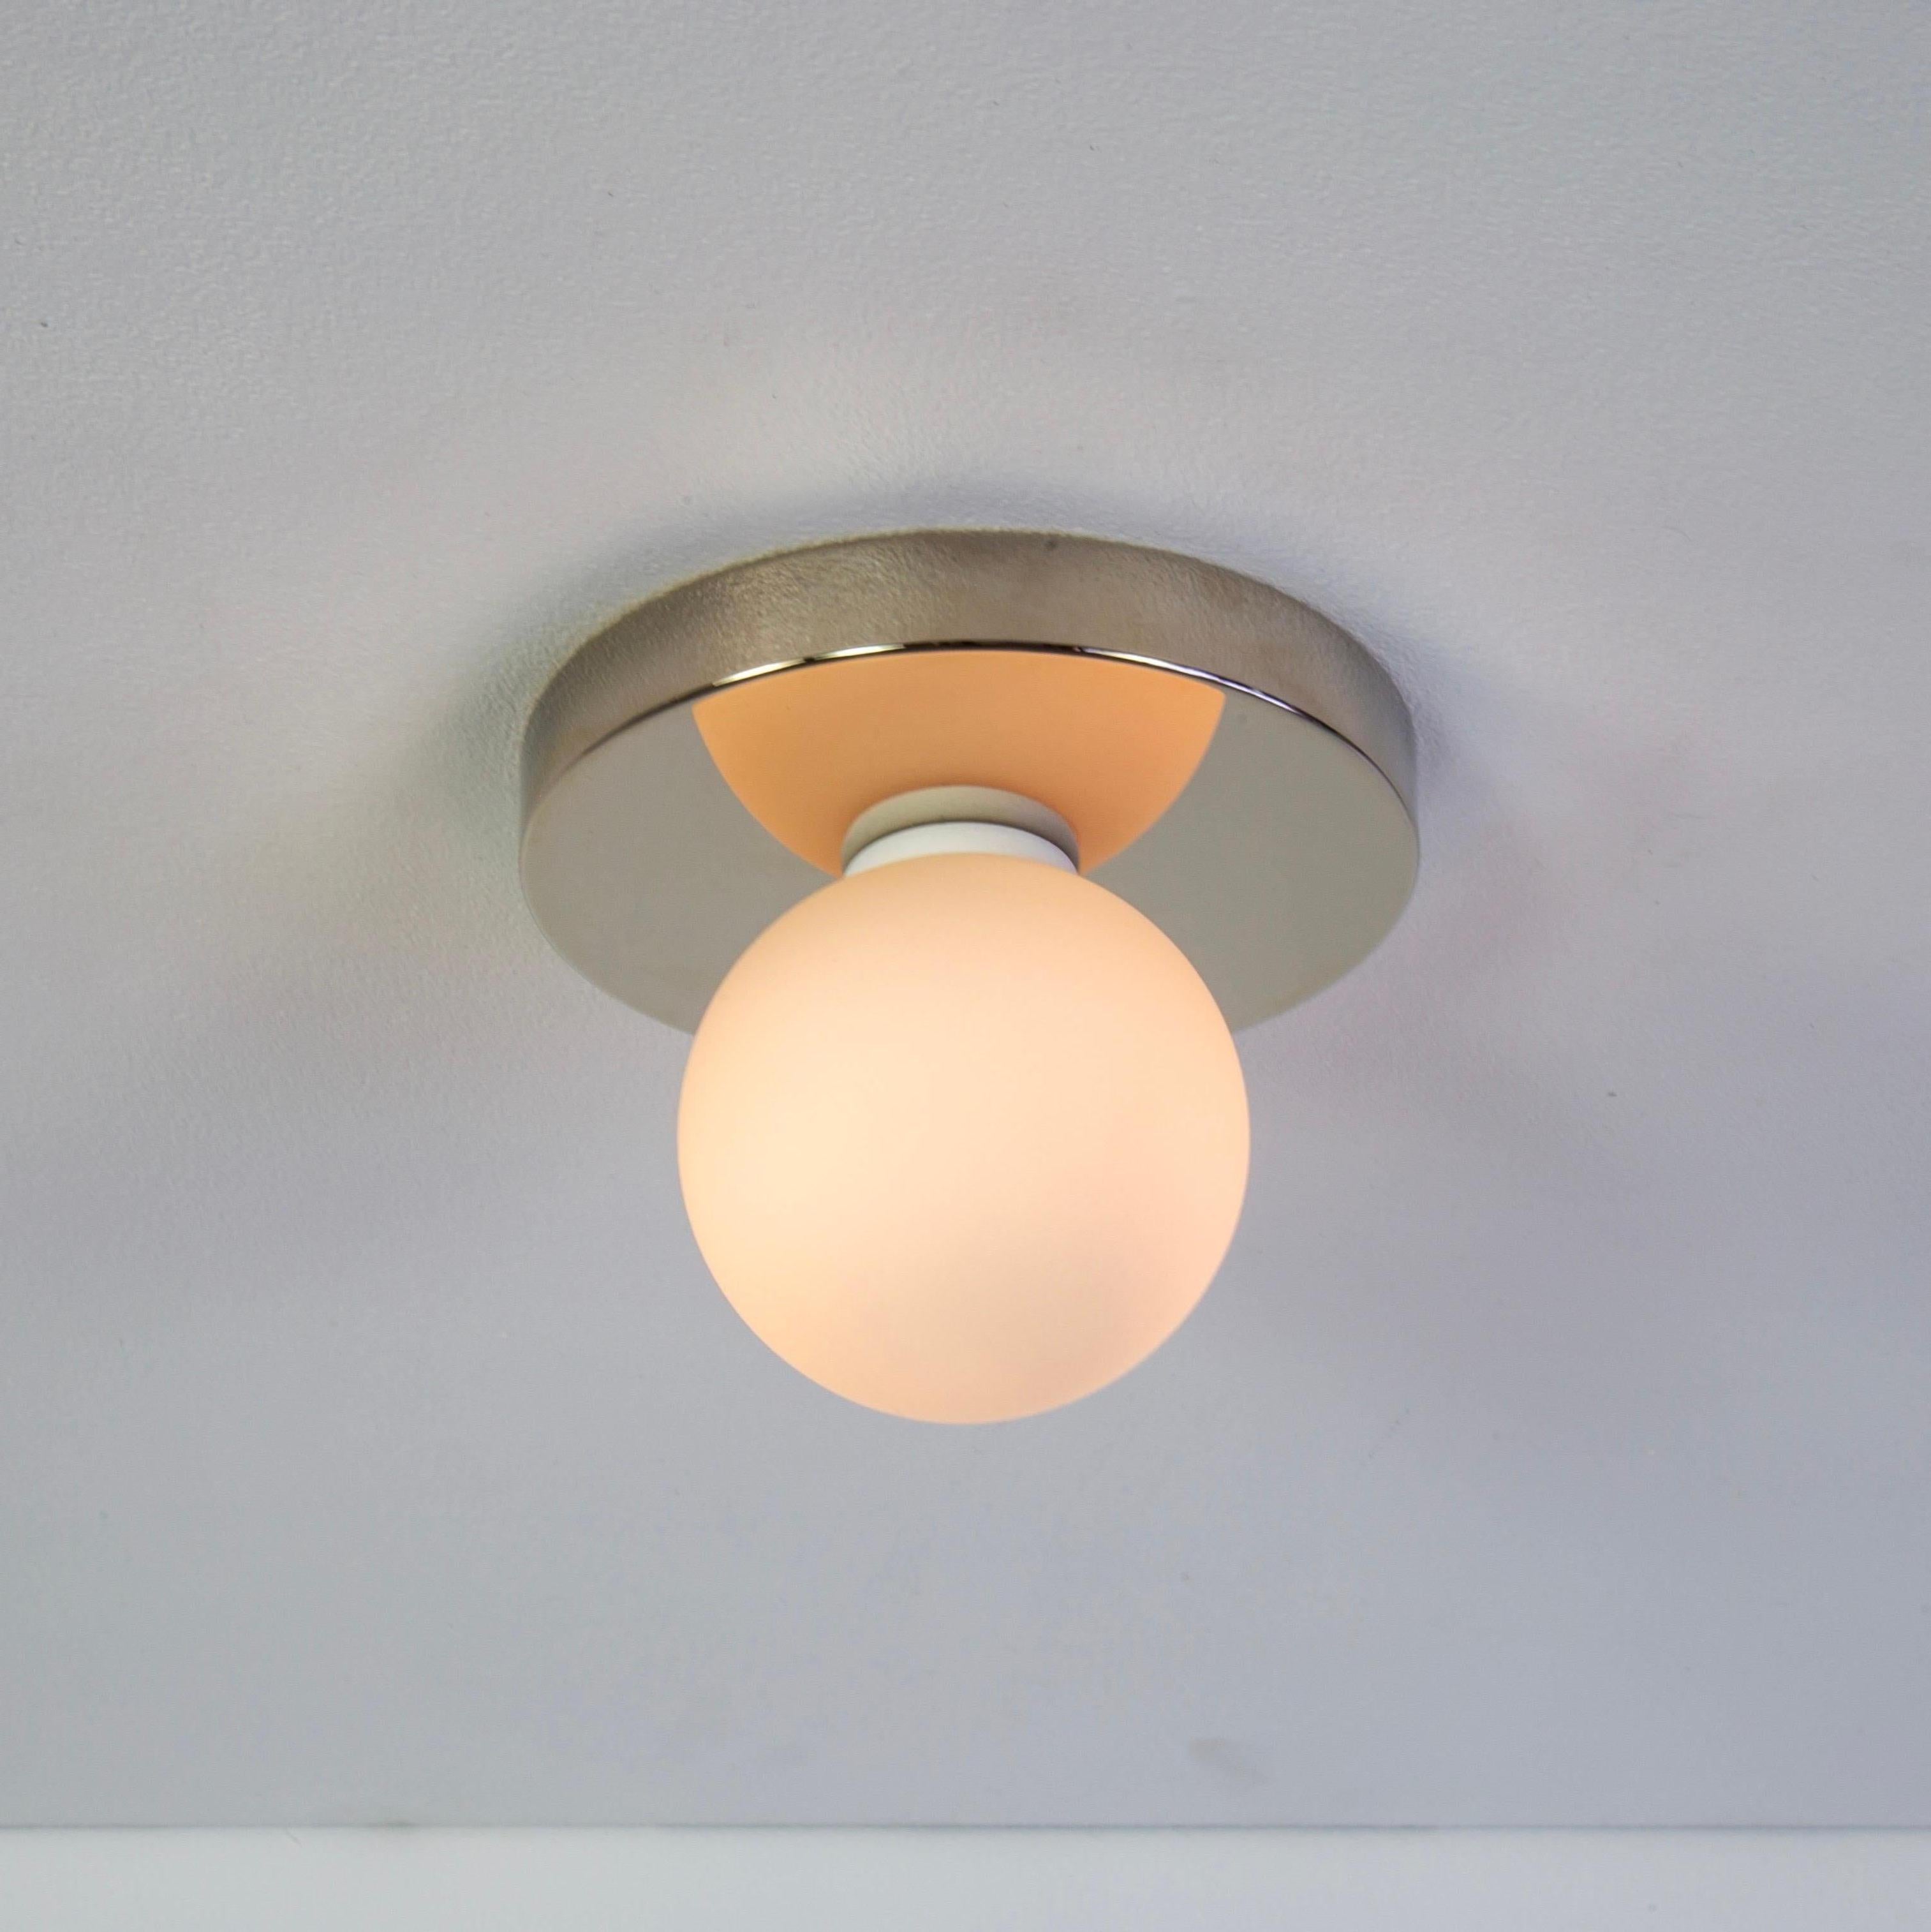 This listing is for 1x Globe Flush Mount in polished nickel designed and manufactured by Research.Lighting.

Materials: Brass, Steel & Glass
Finish: Polished Nickel
Electronics: 1x G9 Socket, 1x 4.5 Watt LED Bulb (included), 450 Lumens
ADA